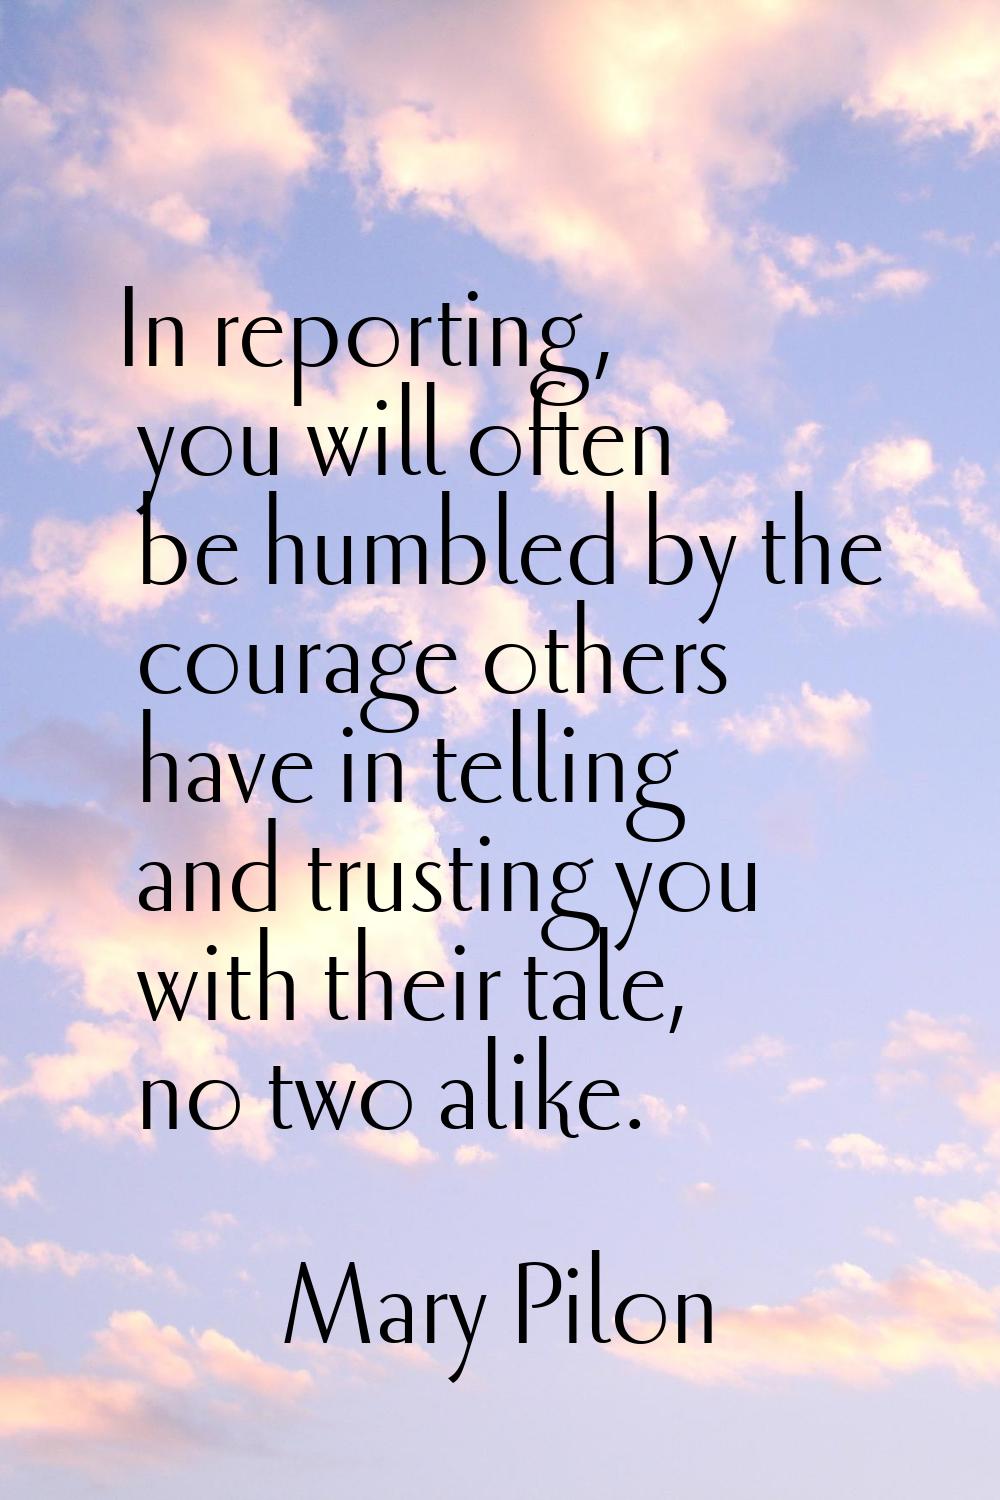 In reporting, you will often be humbled by the courage others have in telling and trusting you with